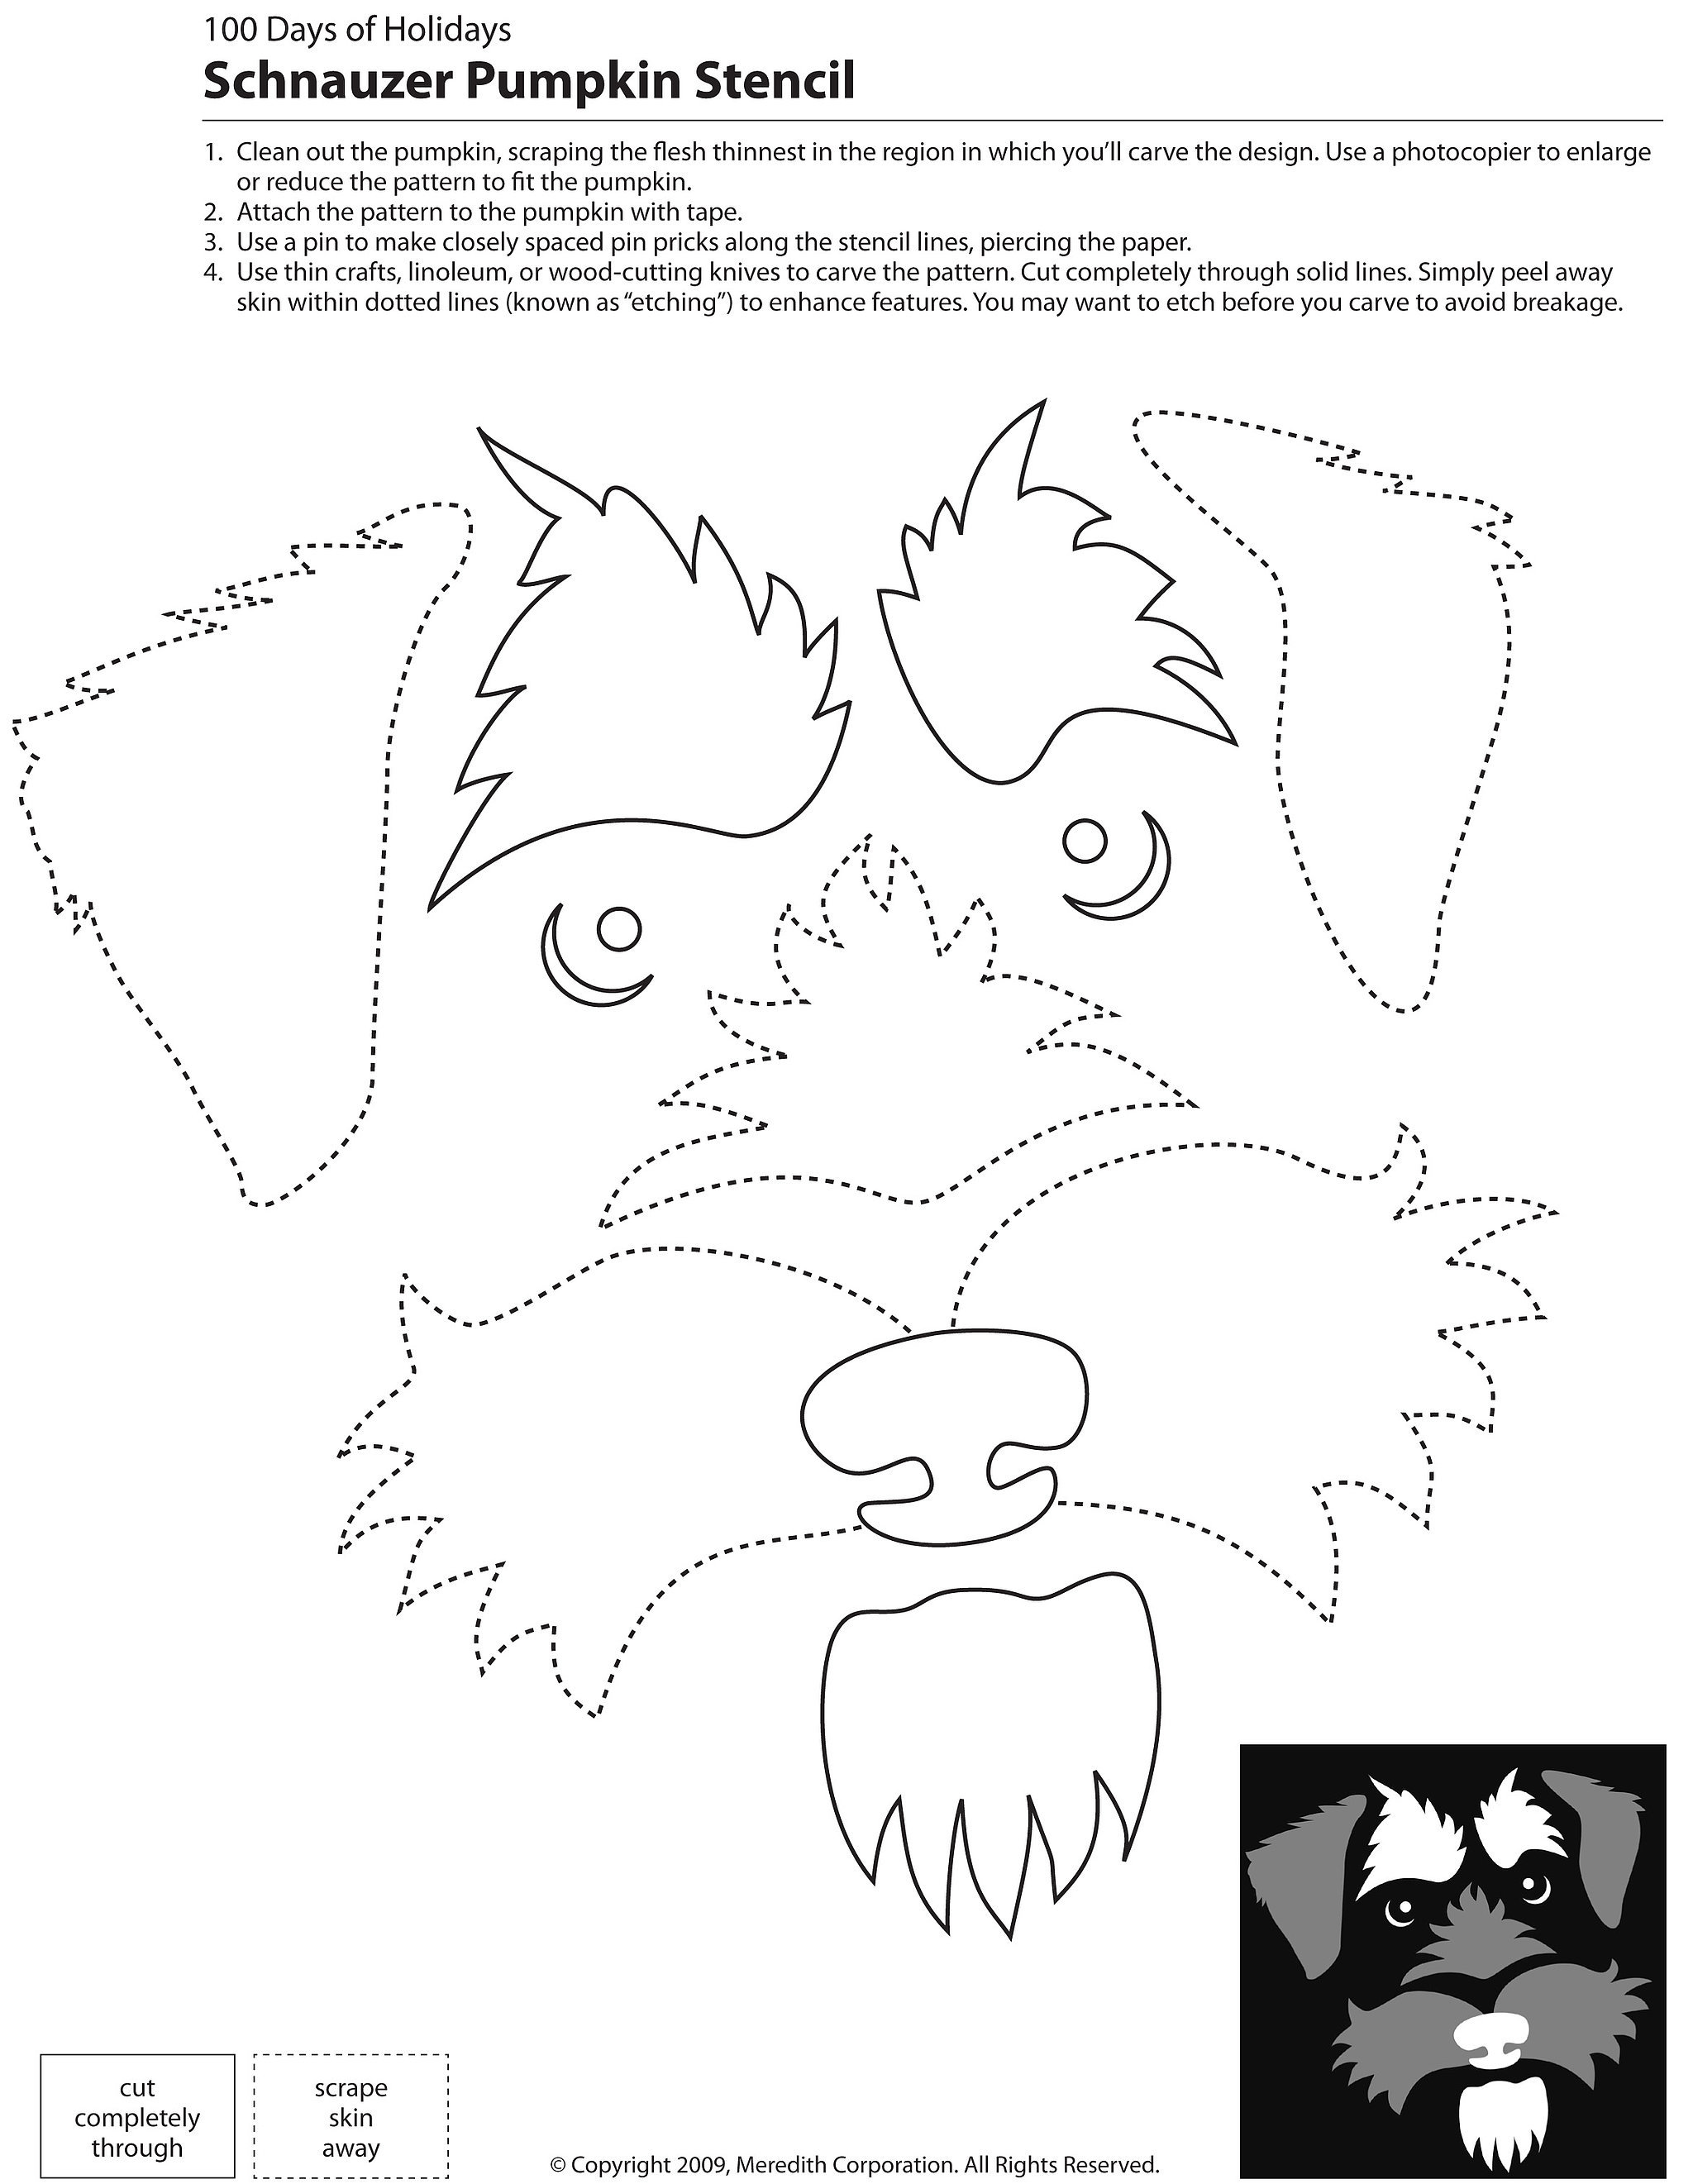 Dogs, Cats, and Other Pets 22 Downloadable Dog Breed Pumpkin Stencils